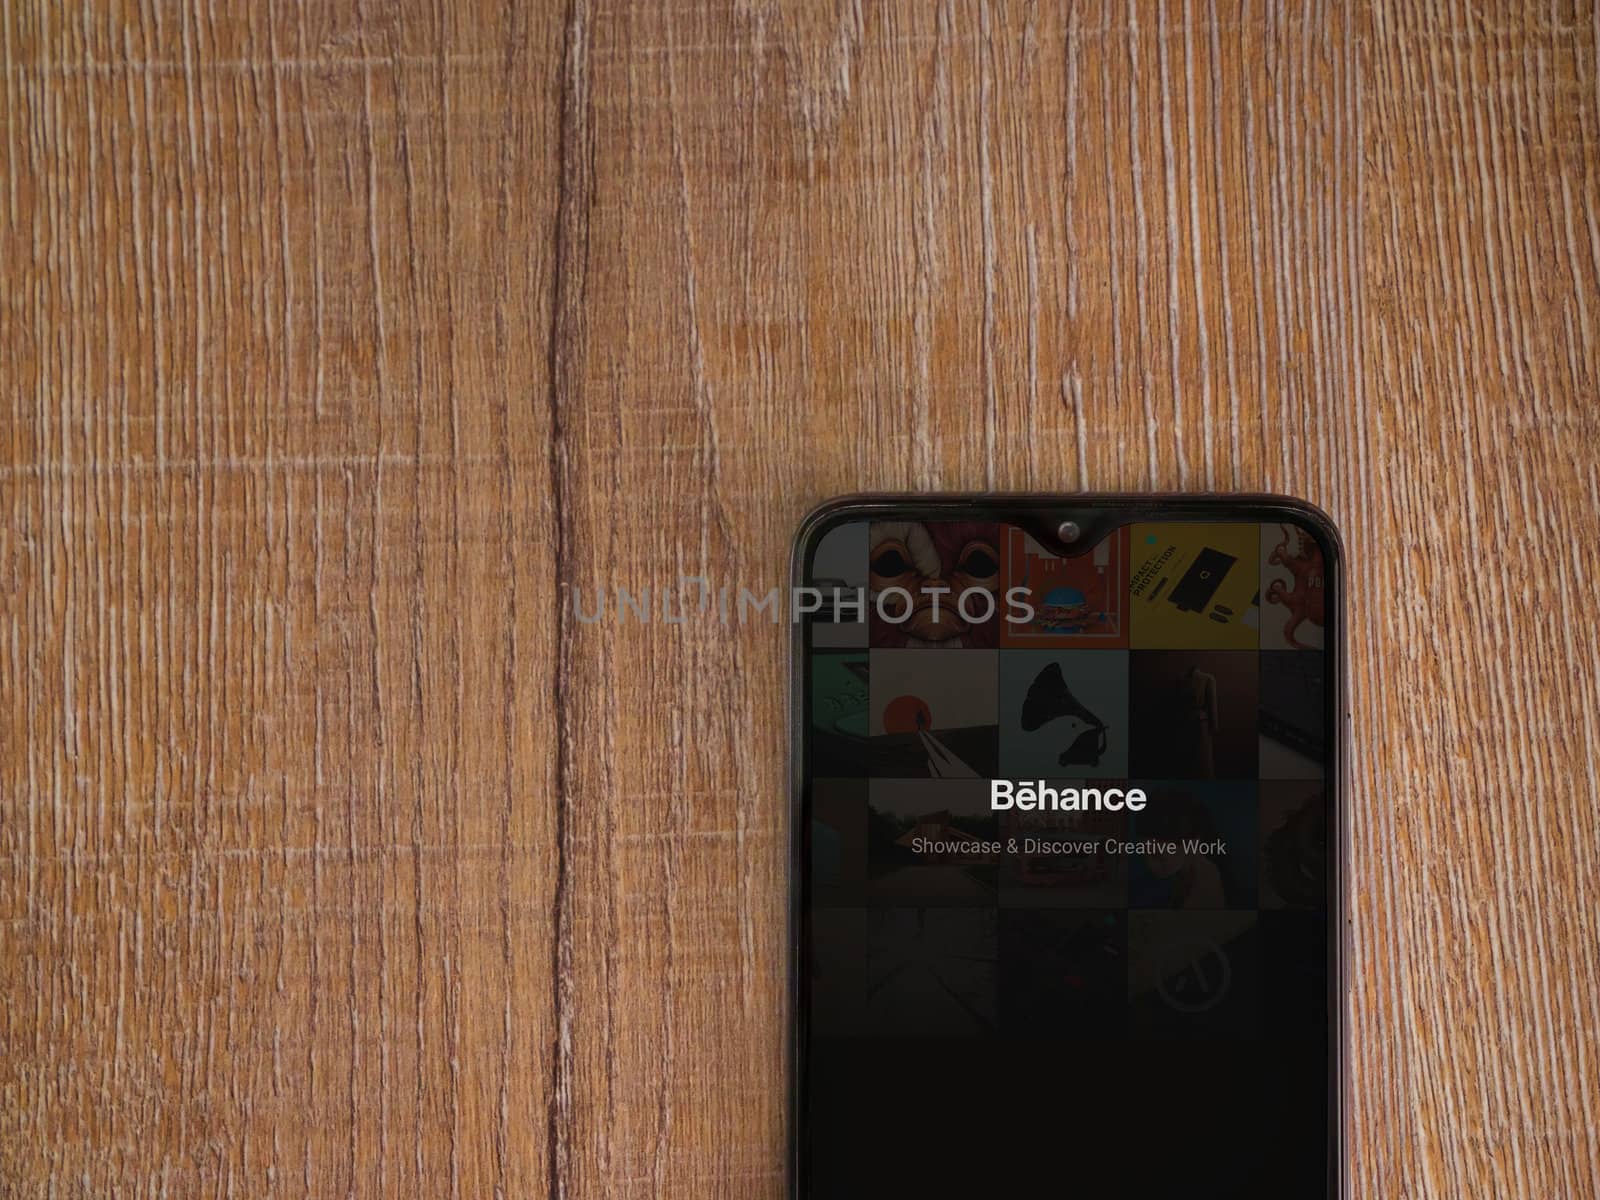 Adobe Behance app launch screen with logo on the display of a bl by wavemovies